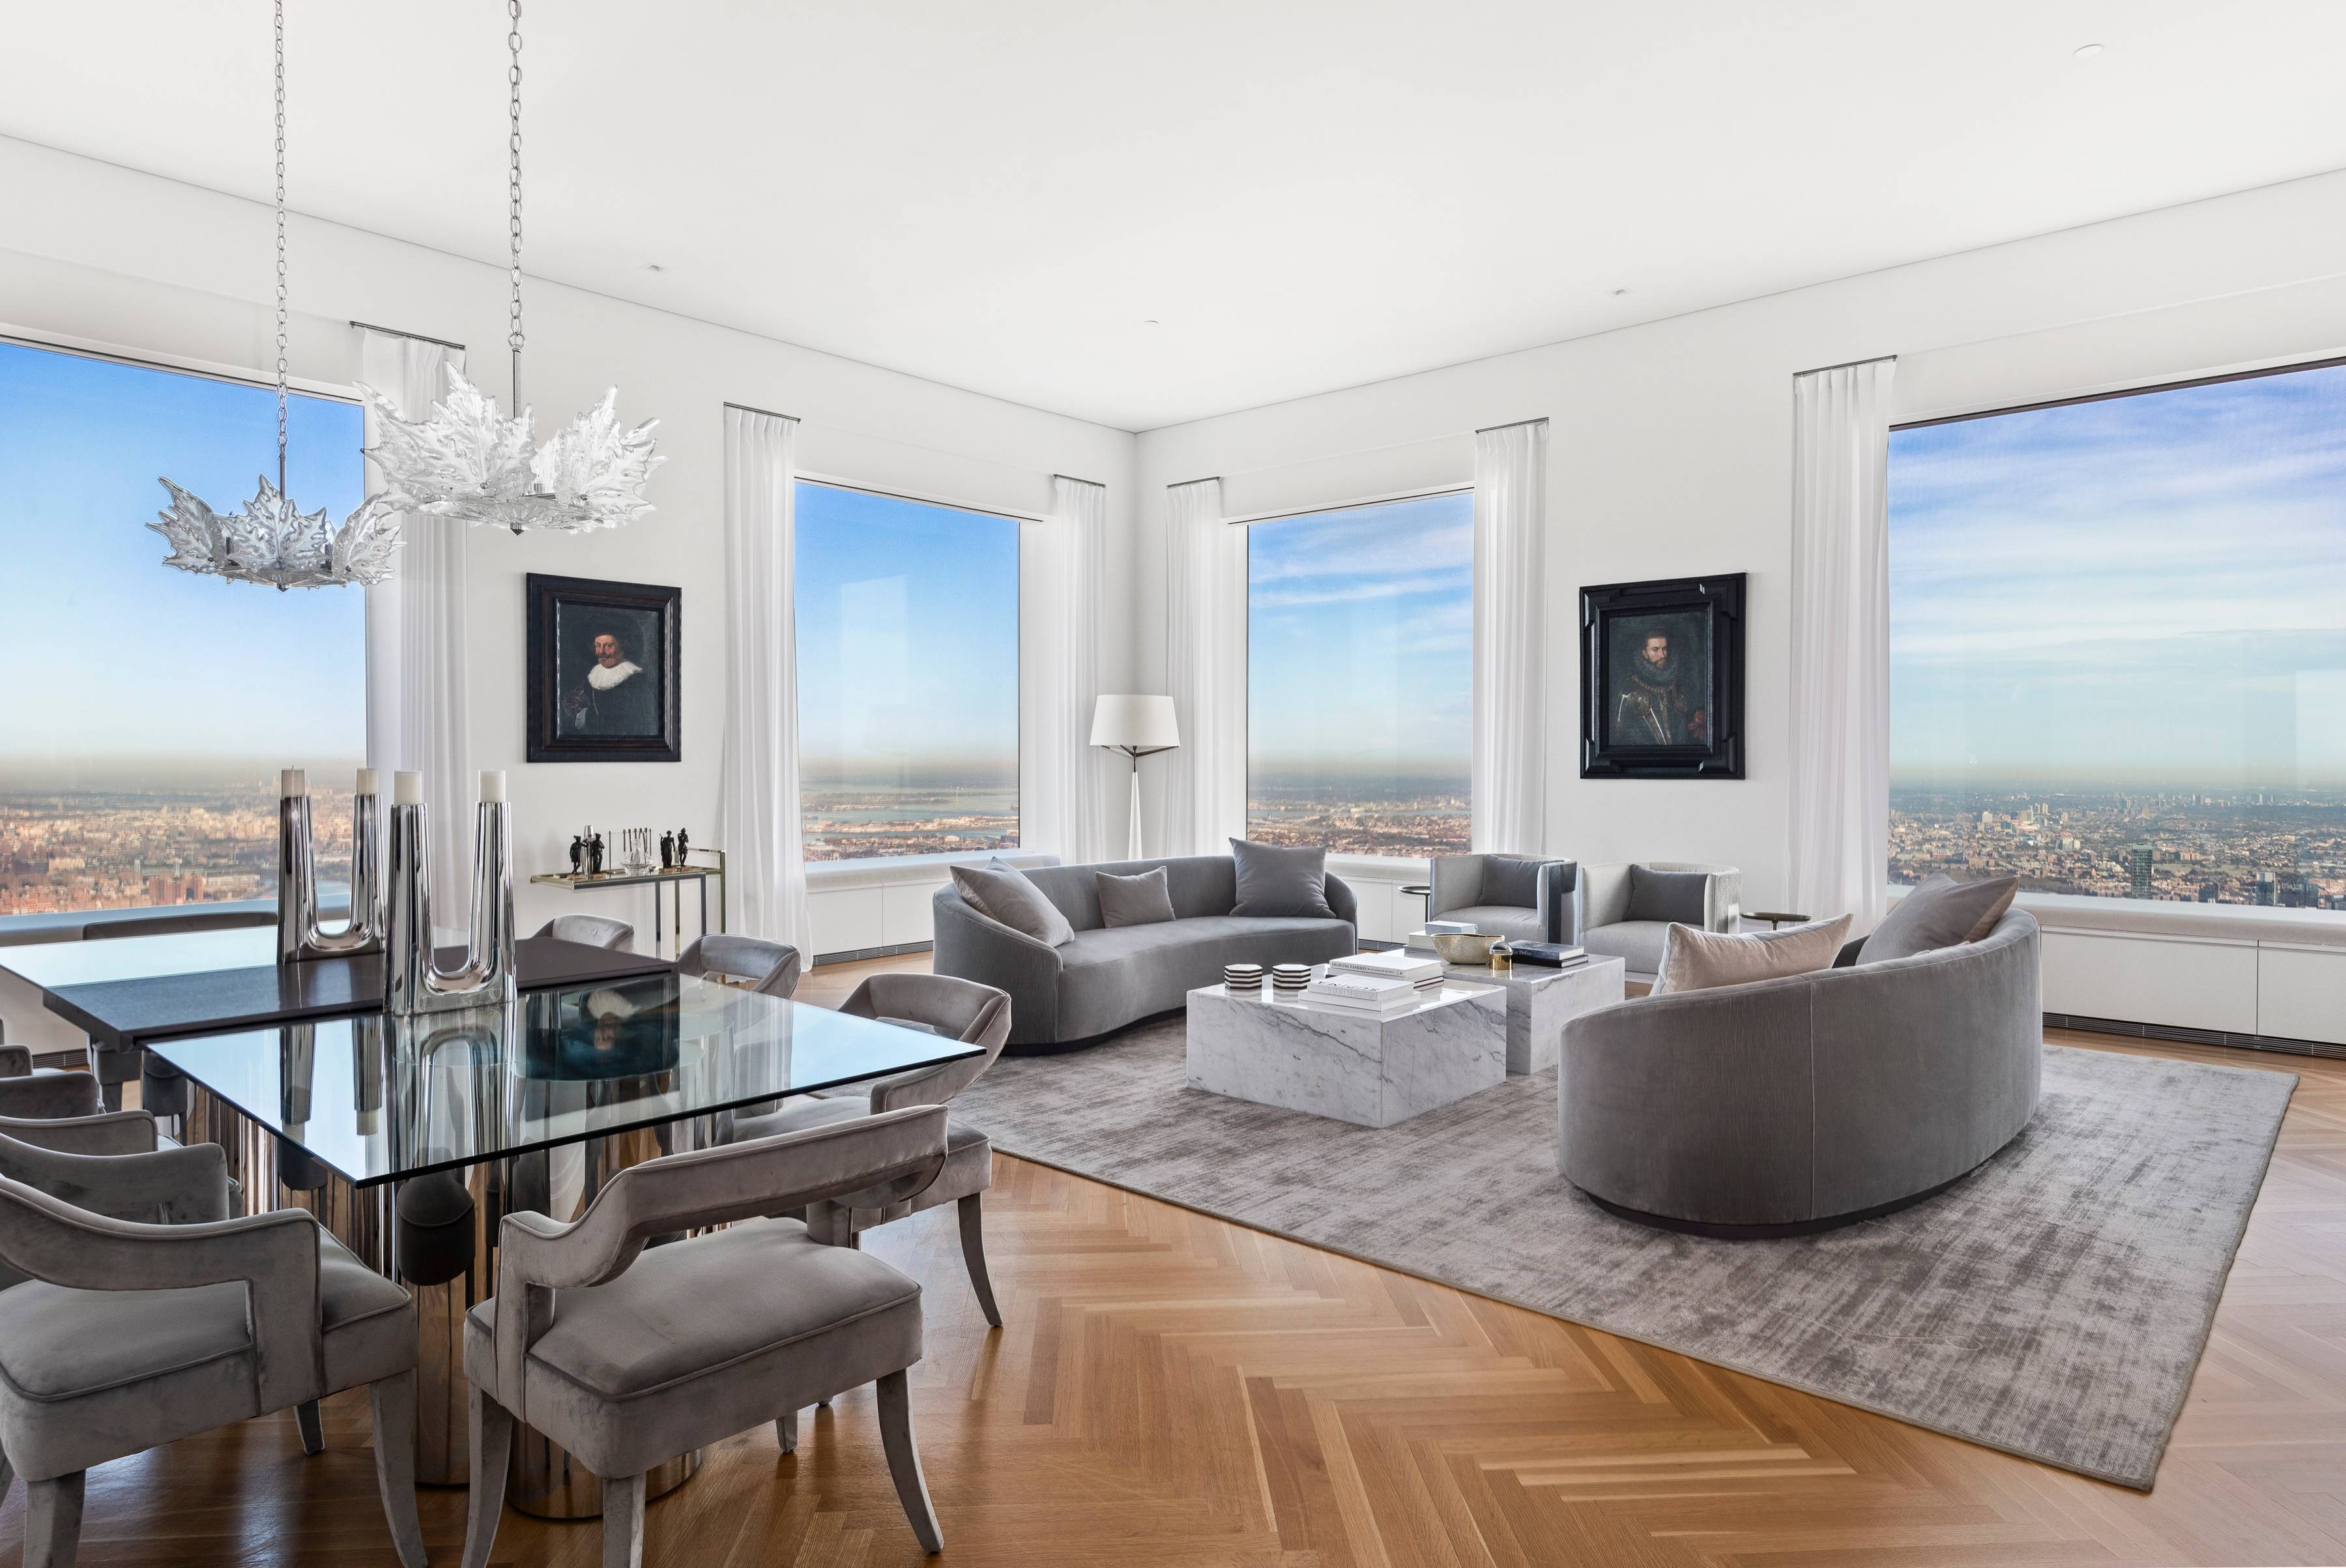 Welcome to the highest floor three bedroom residence and the only half floor, East to West floor plan in the building offering direct Northern views sunrise to sunset of Central ...